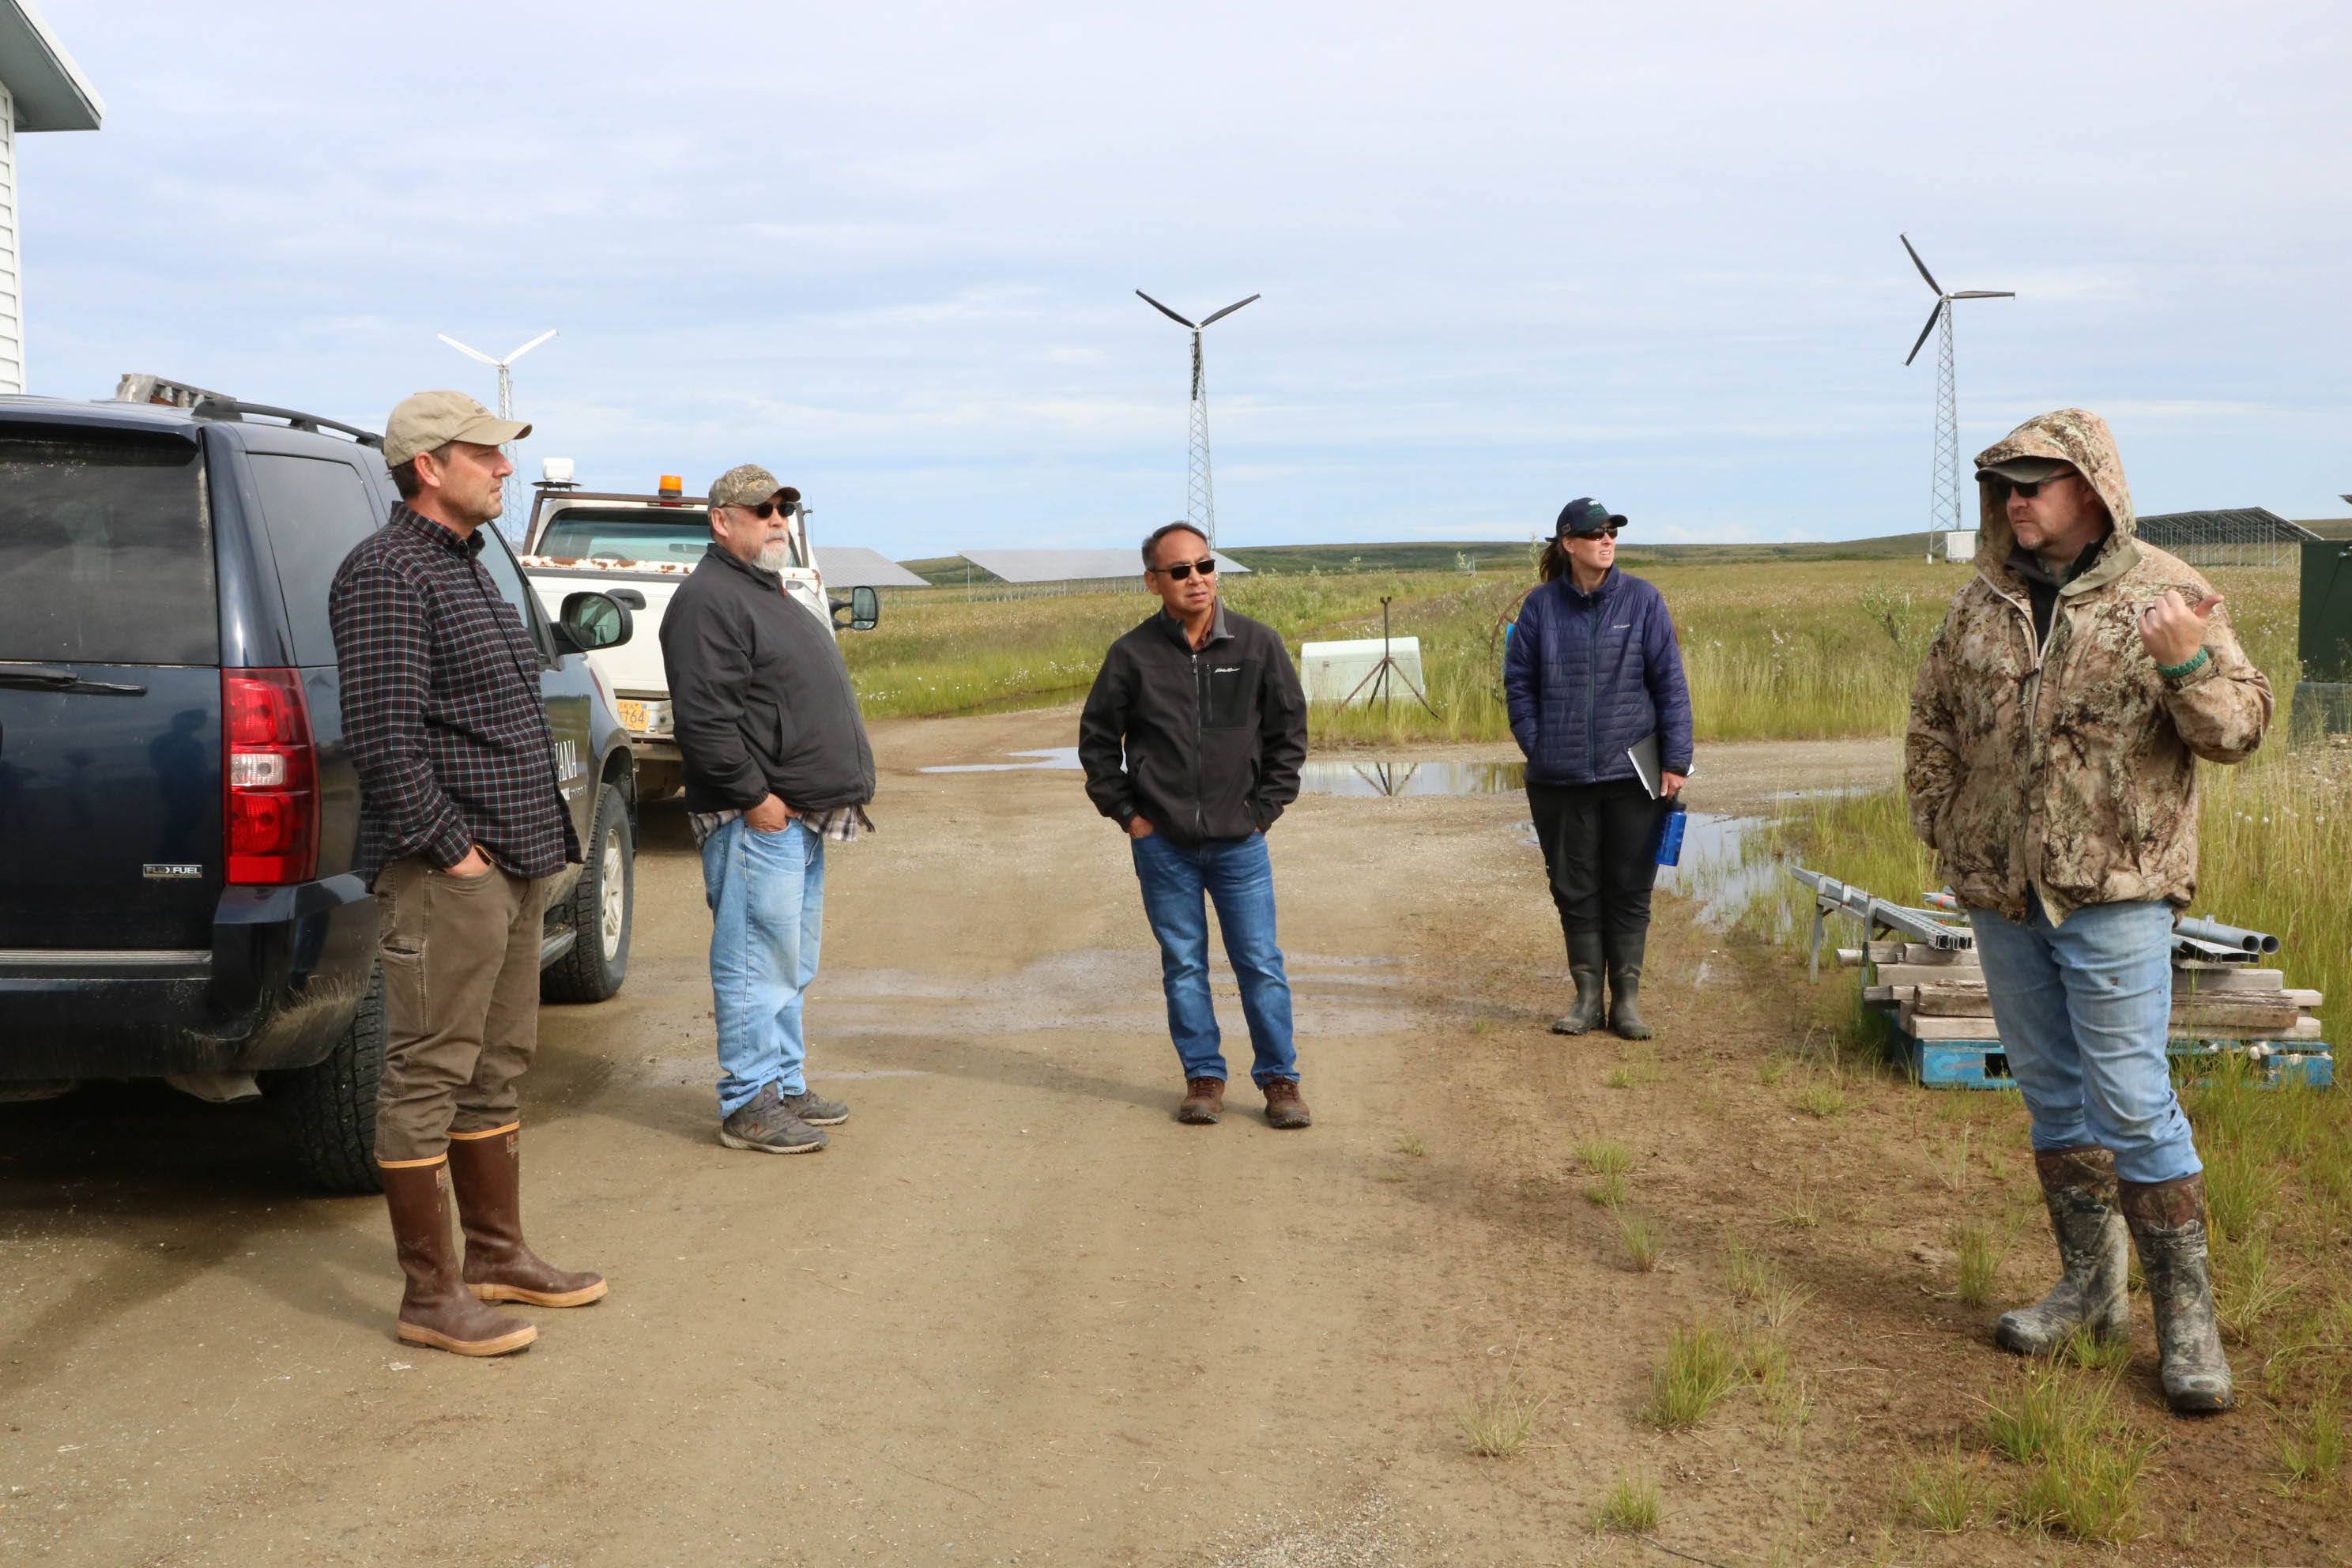 People stand on a dirt road where wind turbines and solar panels visible in the background